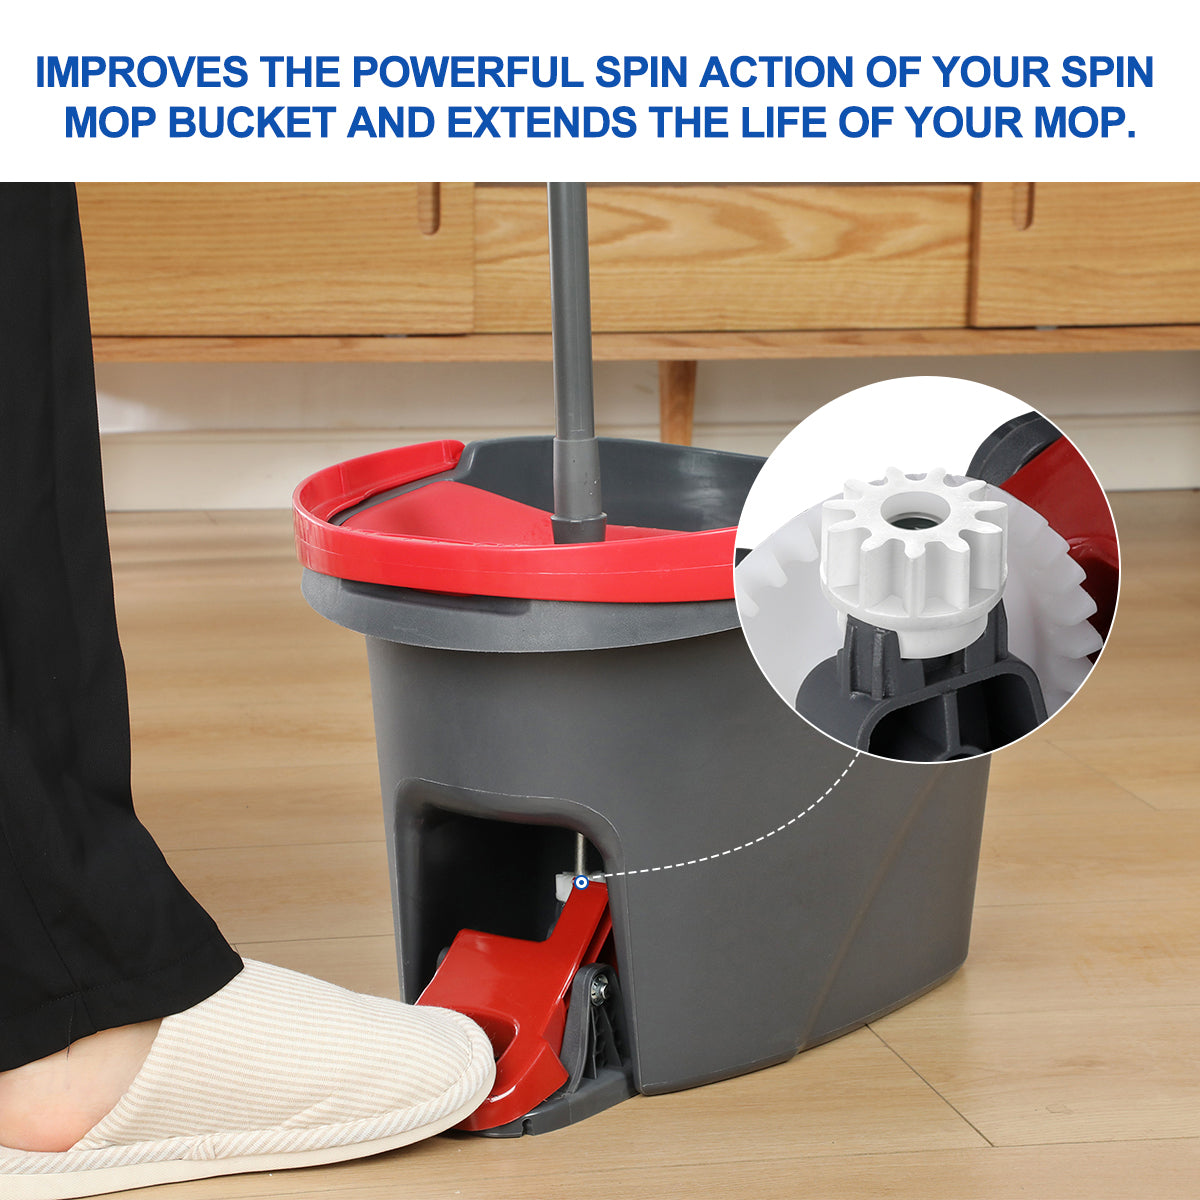 Restore the powerful spinning action of your spin mop bucket. By replacing the bearing, you can extend the lifespan of your mop.